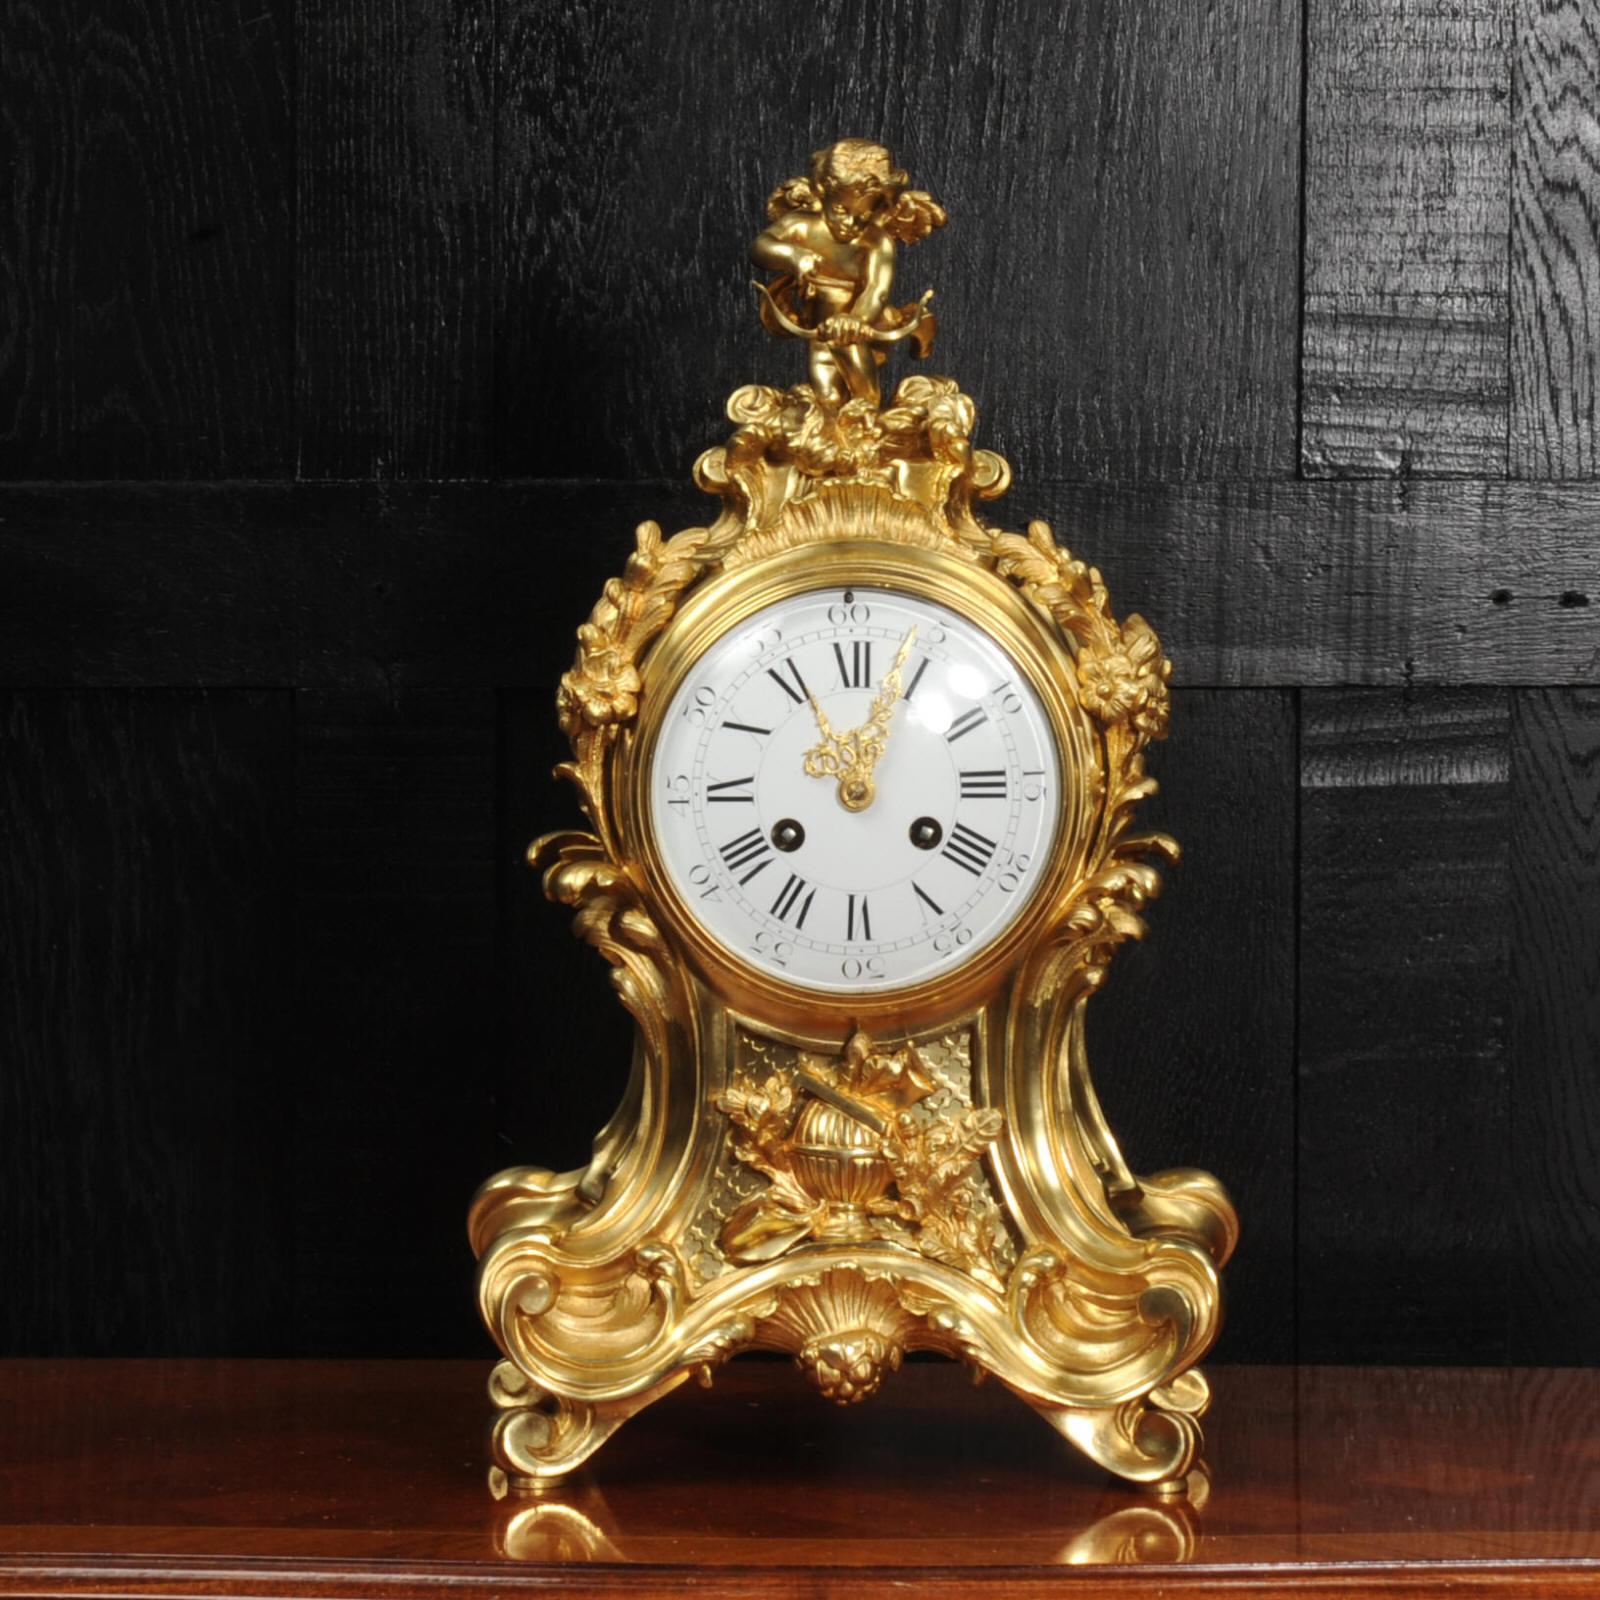 A very fine and substantial ormolu clock by the clockmaker Vincenti. Stunning Rococo balloon form of sweeping acanthus swags, scrolls and floral flourishes. To the top of a beautifully modelled figure of cupid, drawing back on his bow ready to fire